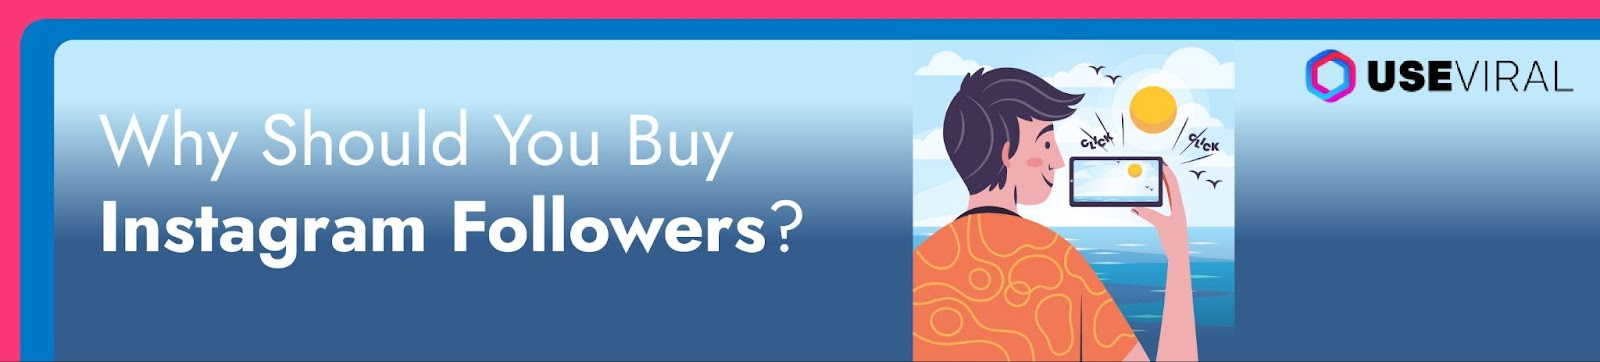 Why Should You Buy Instagram Followers?